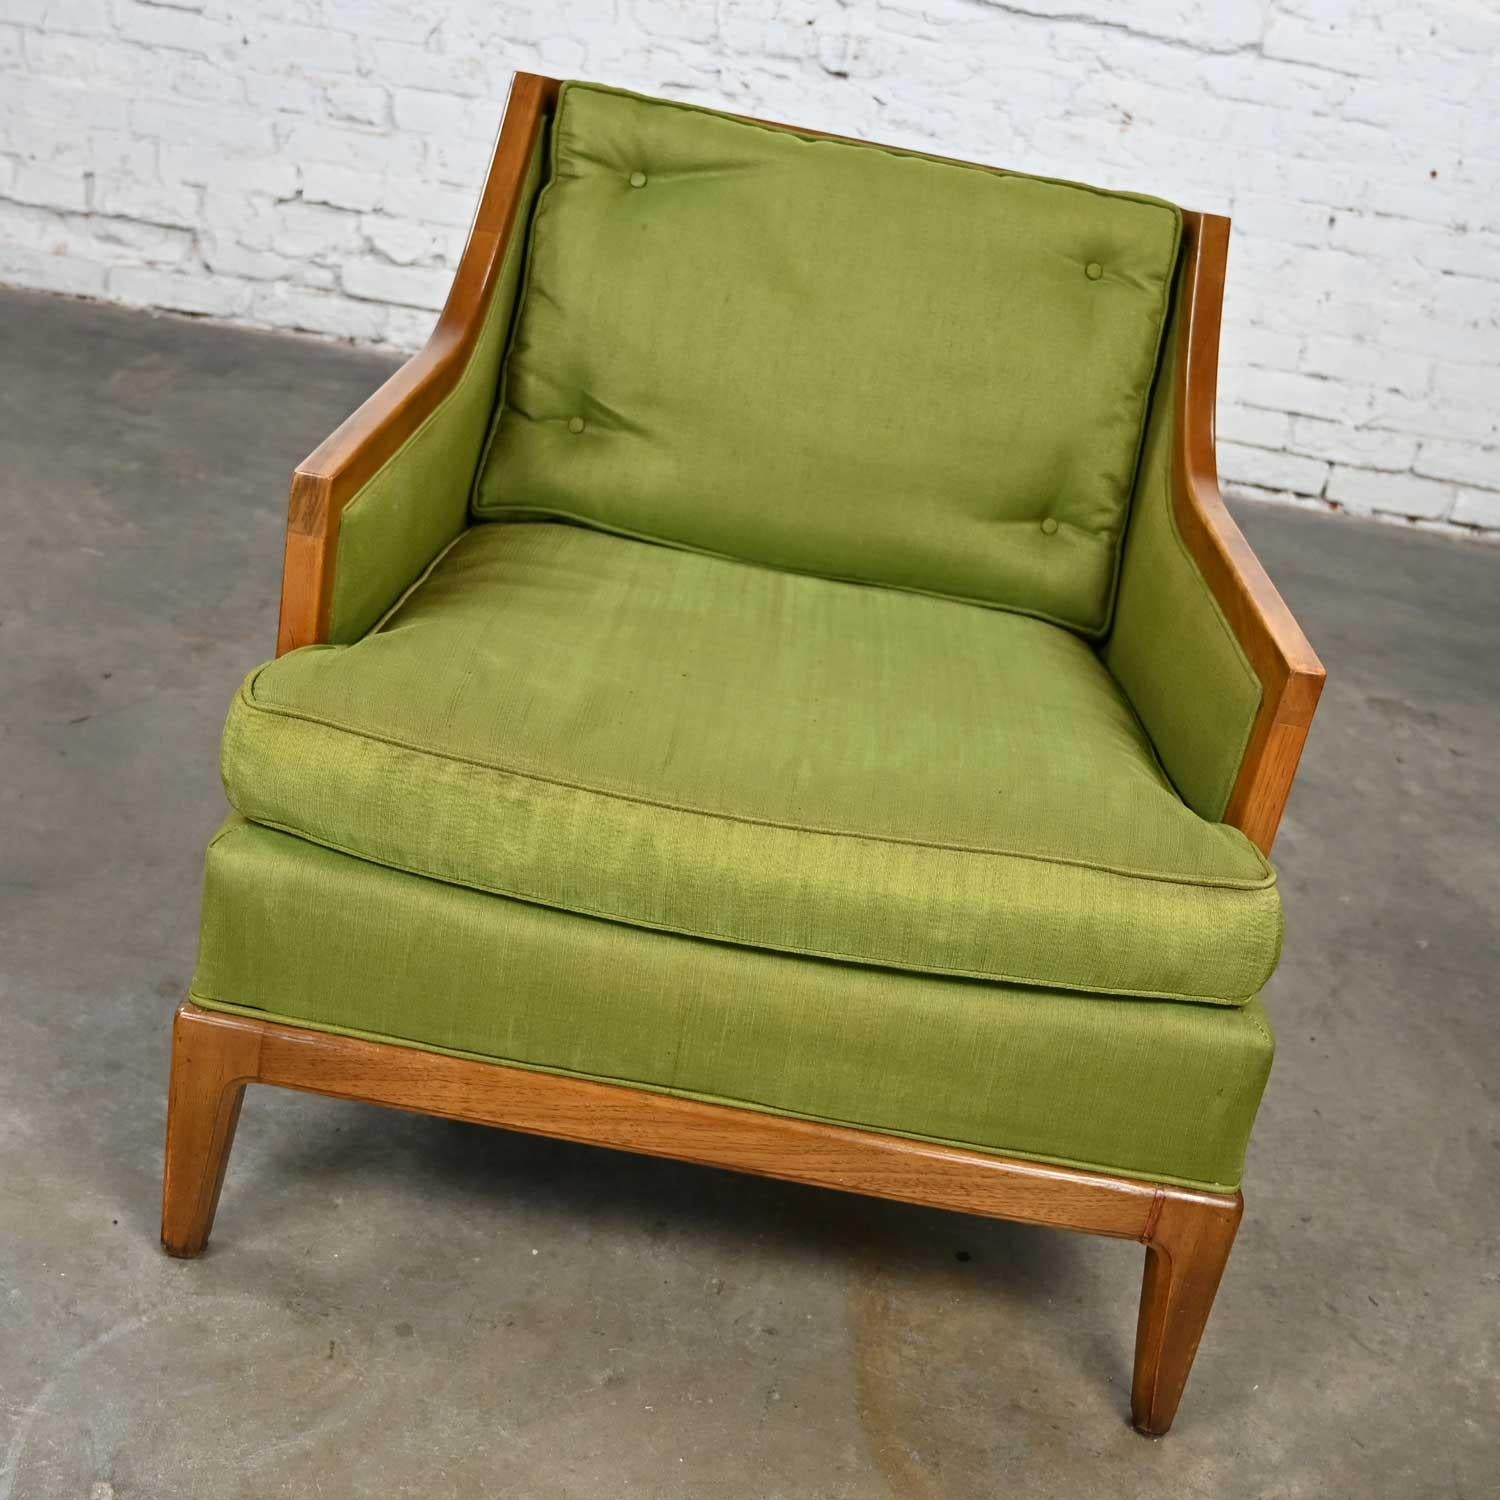 Lovely vintage MCM (Mid-Century Modern) Sears & Roebuck by Drexel Symphony Collection lounge chair with original silk like green upholstery and walnut toned wood frame with radio weave cane insert sides. Beautiful condition, keeping in mind that